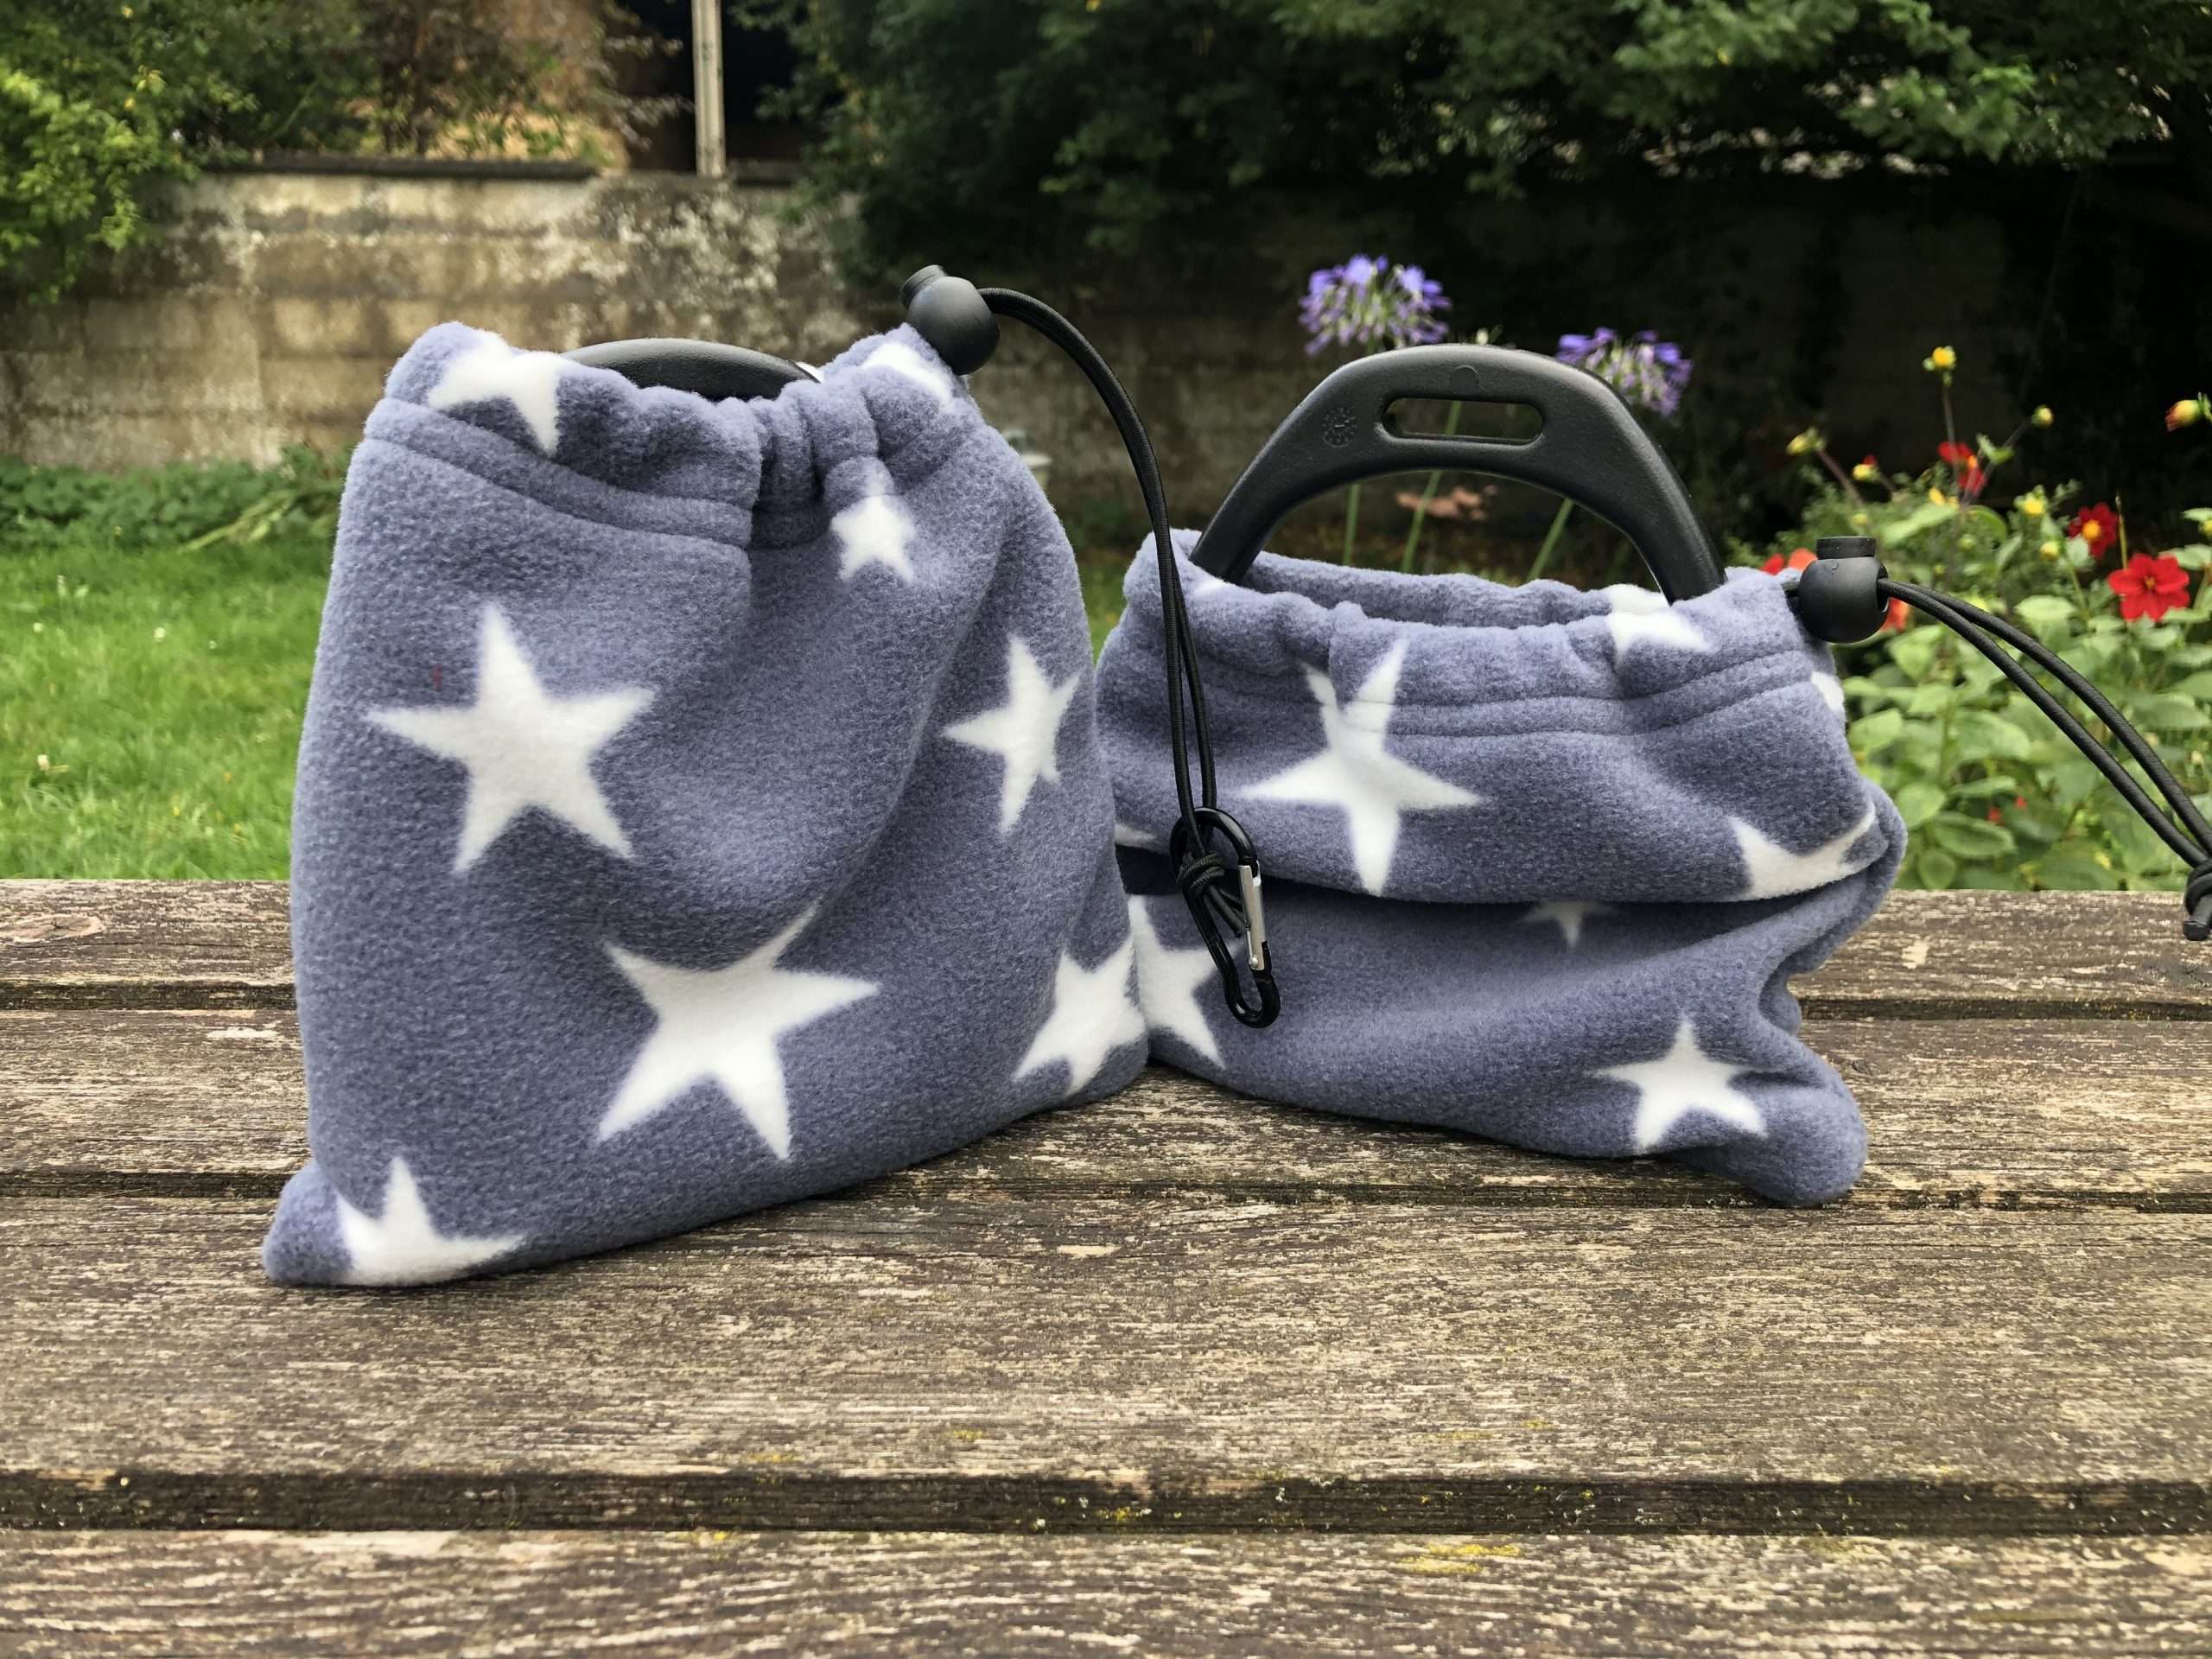 IMG 3229 scaled Fleece Stirrup Covers - Stars Help protect your saddle from dirt and scratches from the stirrups. Approx 7x7 inches Items posted within 1-3 working days. Shipped using Royal Mail 2nd Class. Back orders allow an extra 7 - 8 working days.